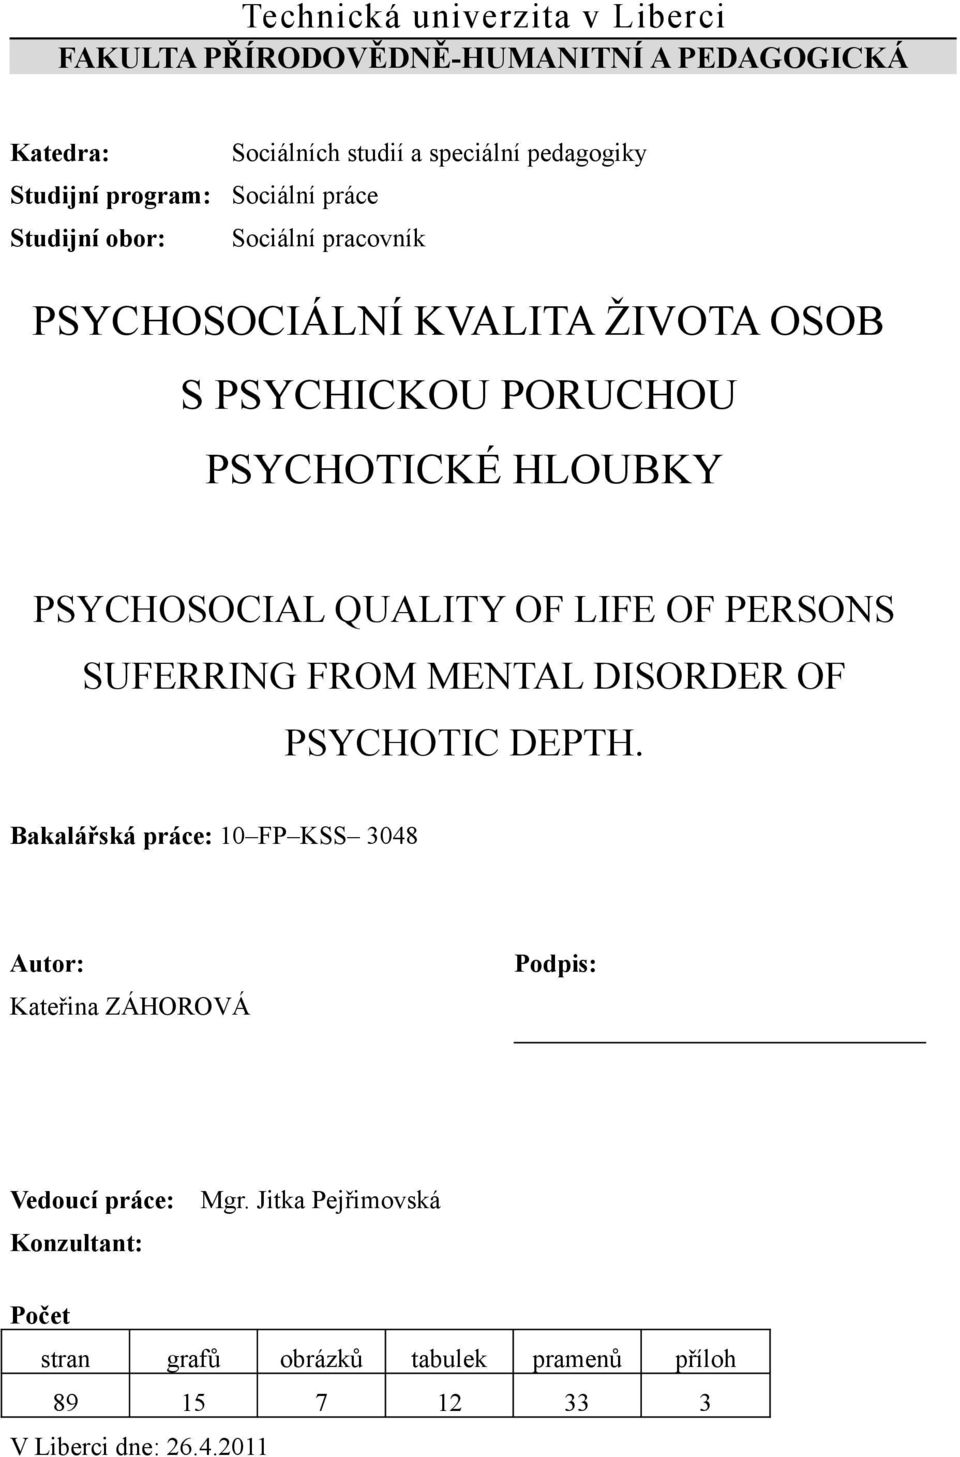 PSYCHOSOCIAL QUALITY OF LIFE OF PERSONS SUFERRING FROM MENTAL DISORDER OF PSYCHOTIC DEPTH.